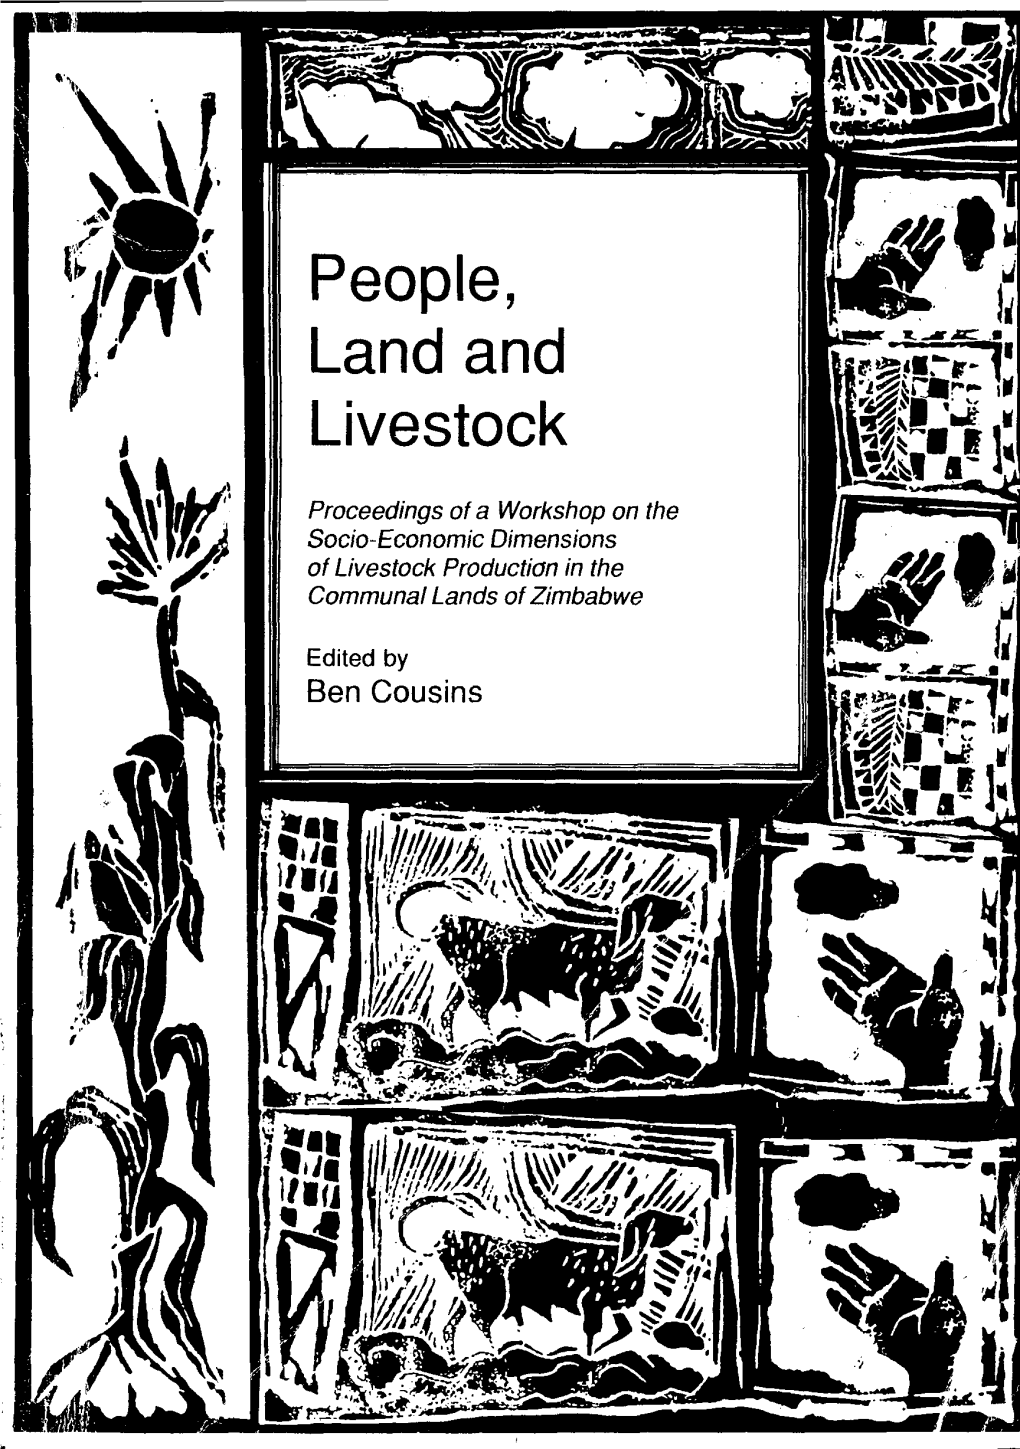 People, Land and Livestock